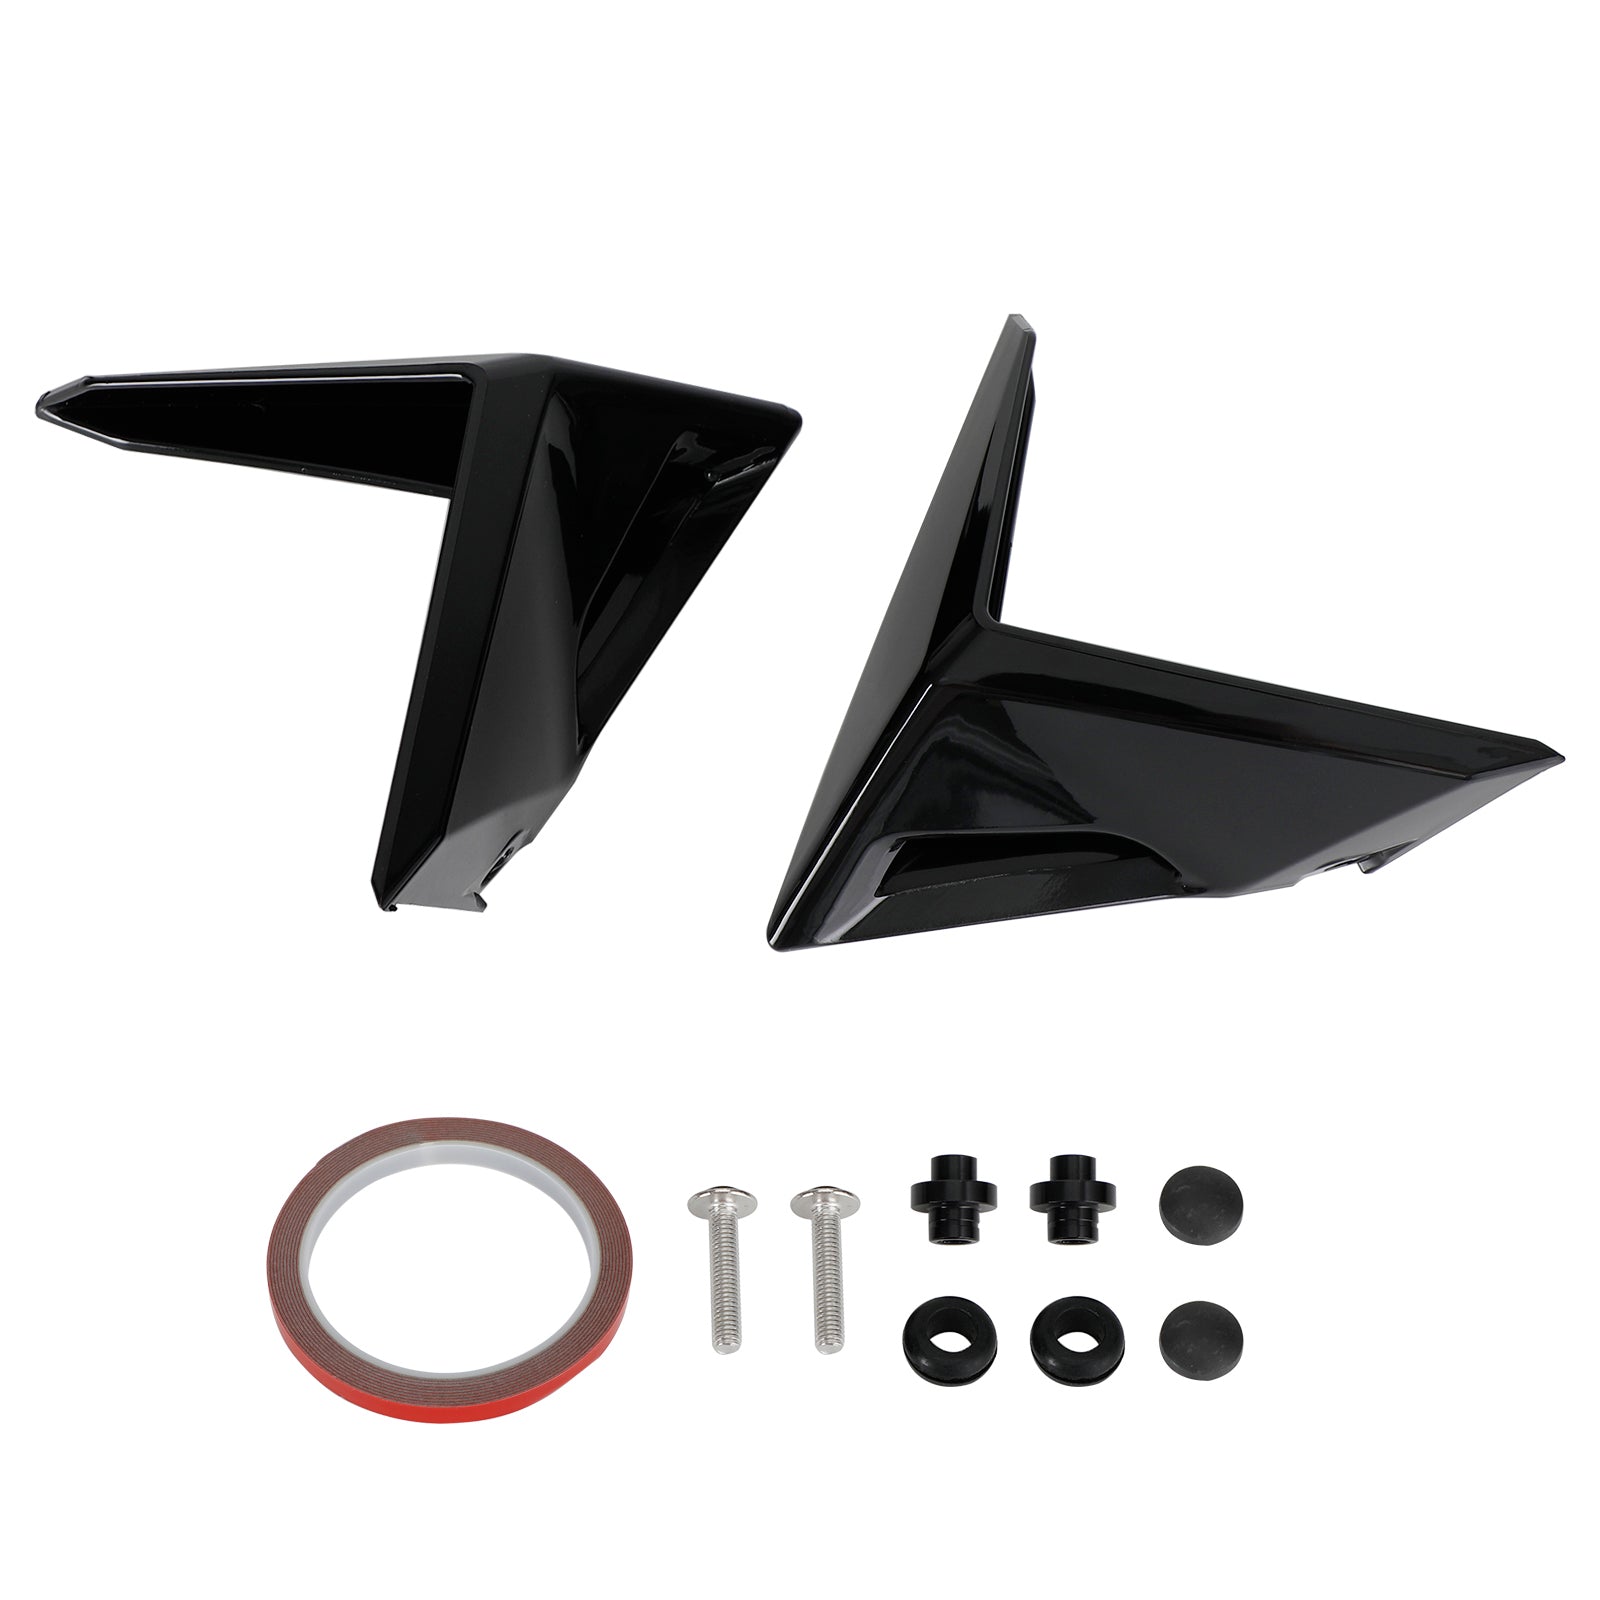 Upper Fairing Side Wing Deflector Winglets fit for Honda Forza 750 2021-2022 Generic